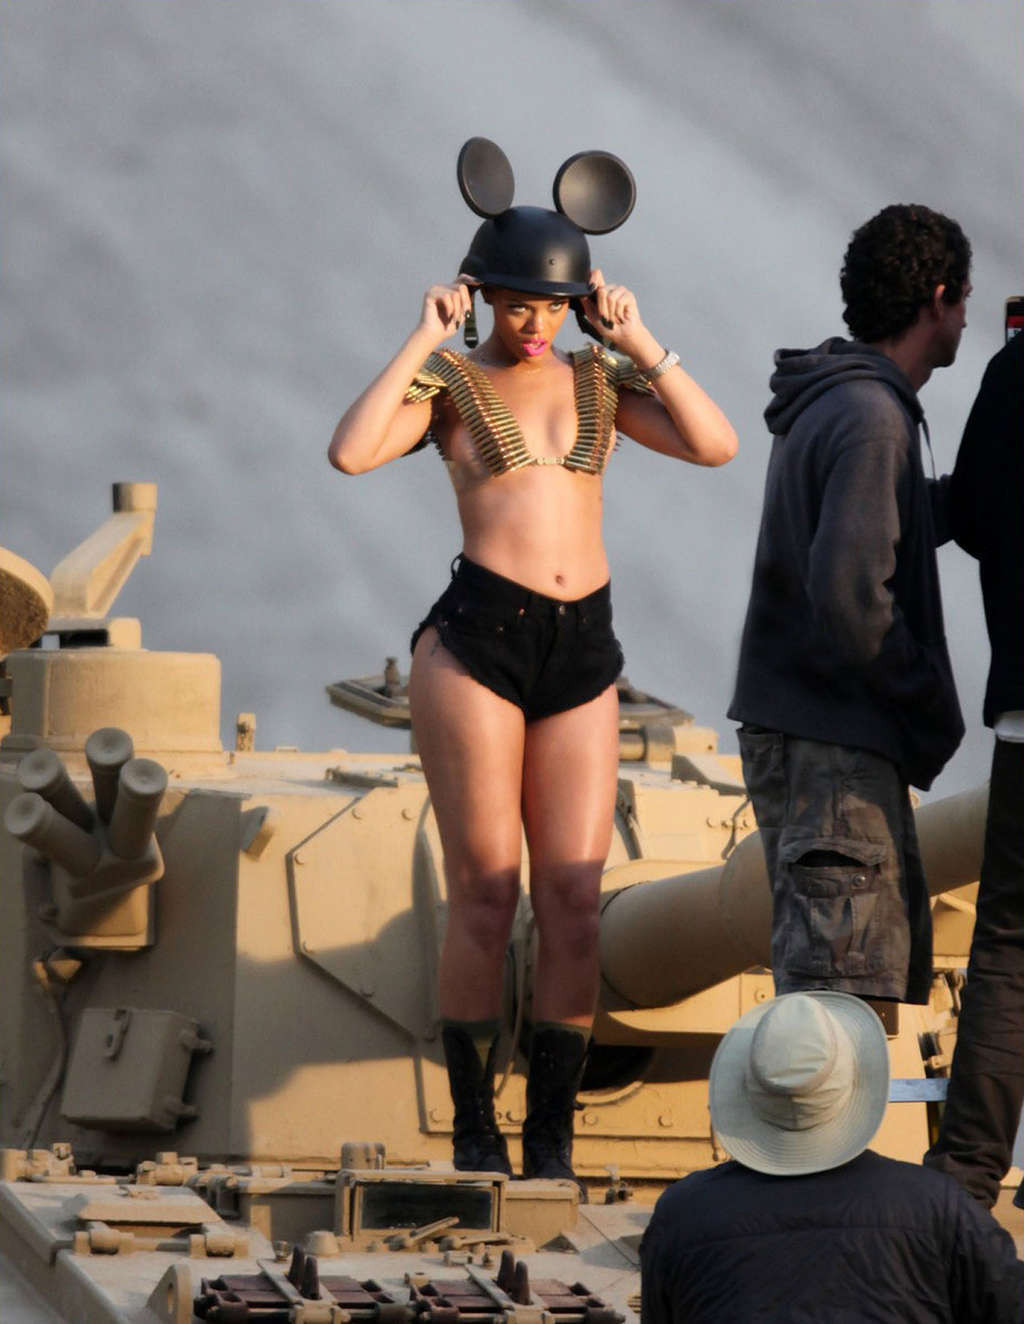 Rihanna nipple slip and exposing her nice big tits on video set in military styl #75371101